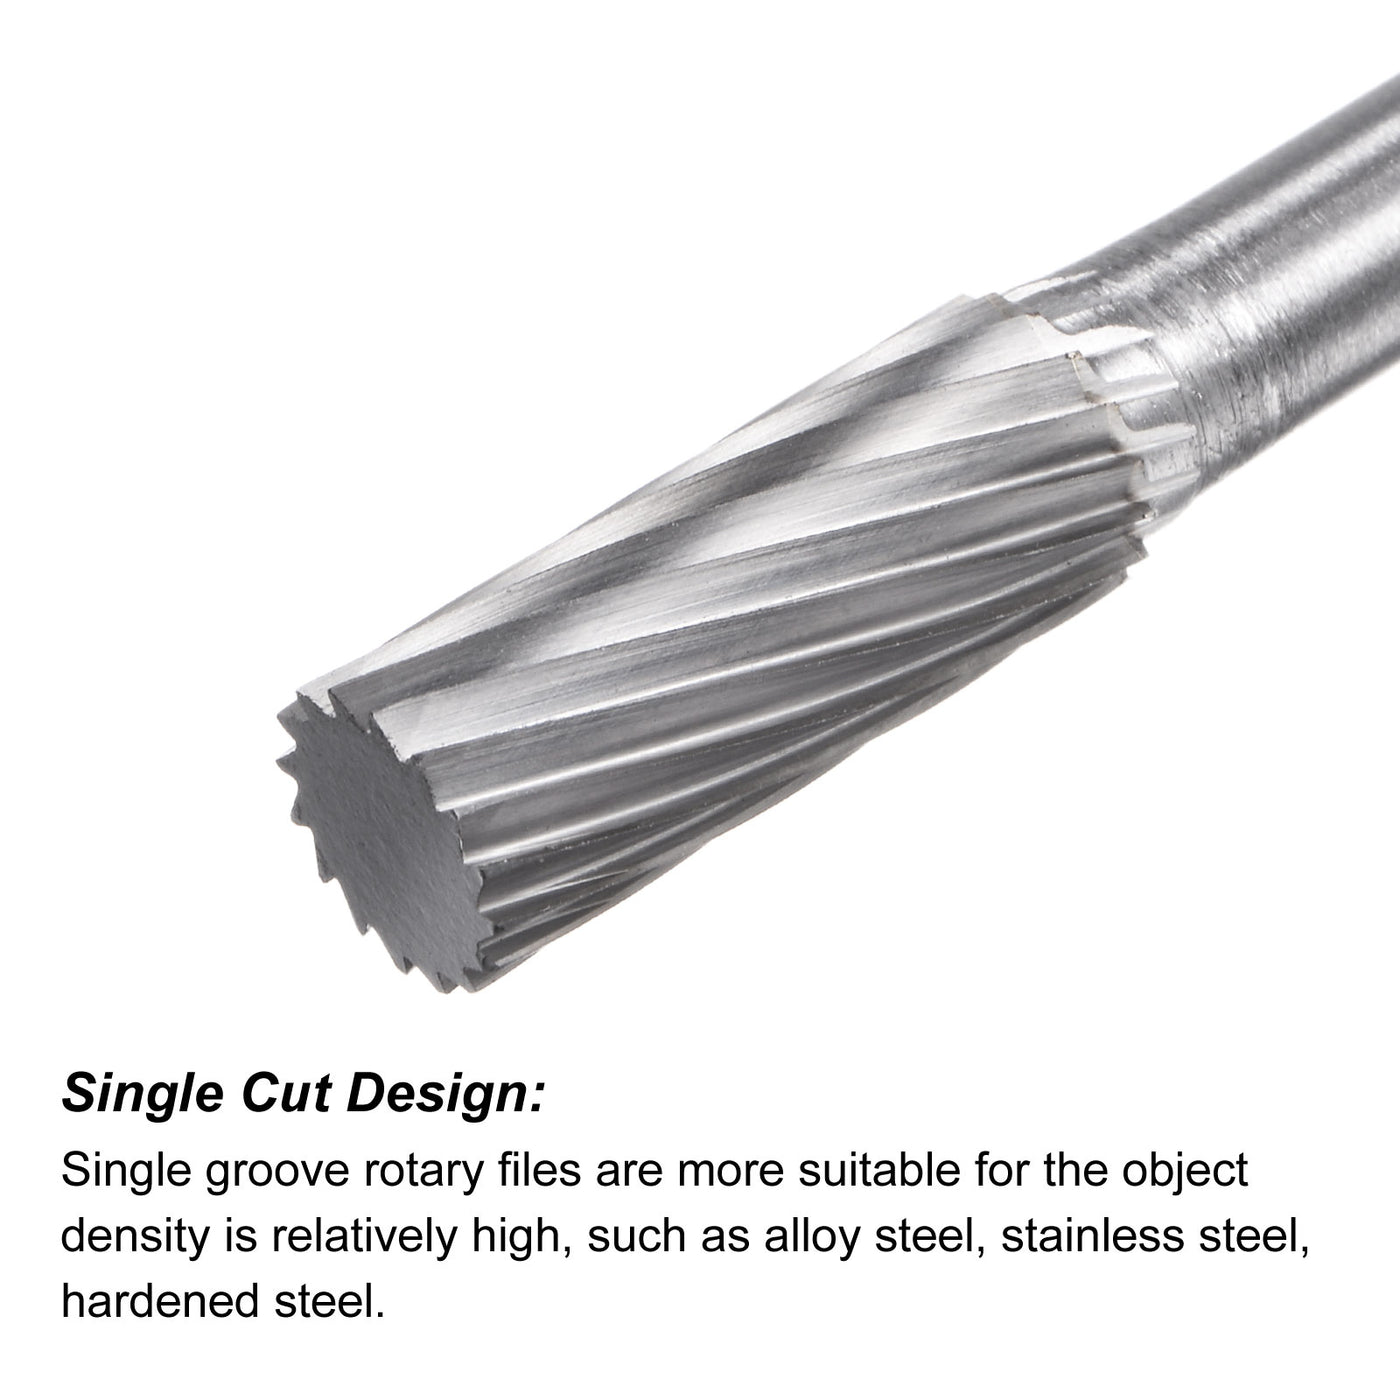 uxcell Uxcell 8mm x 150mm 6mm Shank Single Cut Cylinder Carbide Tip Rotary Files